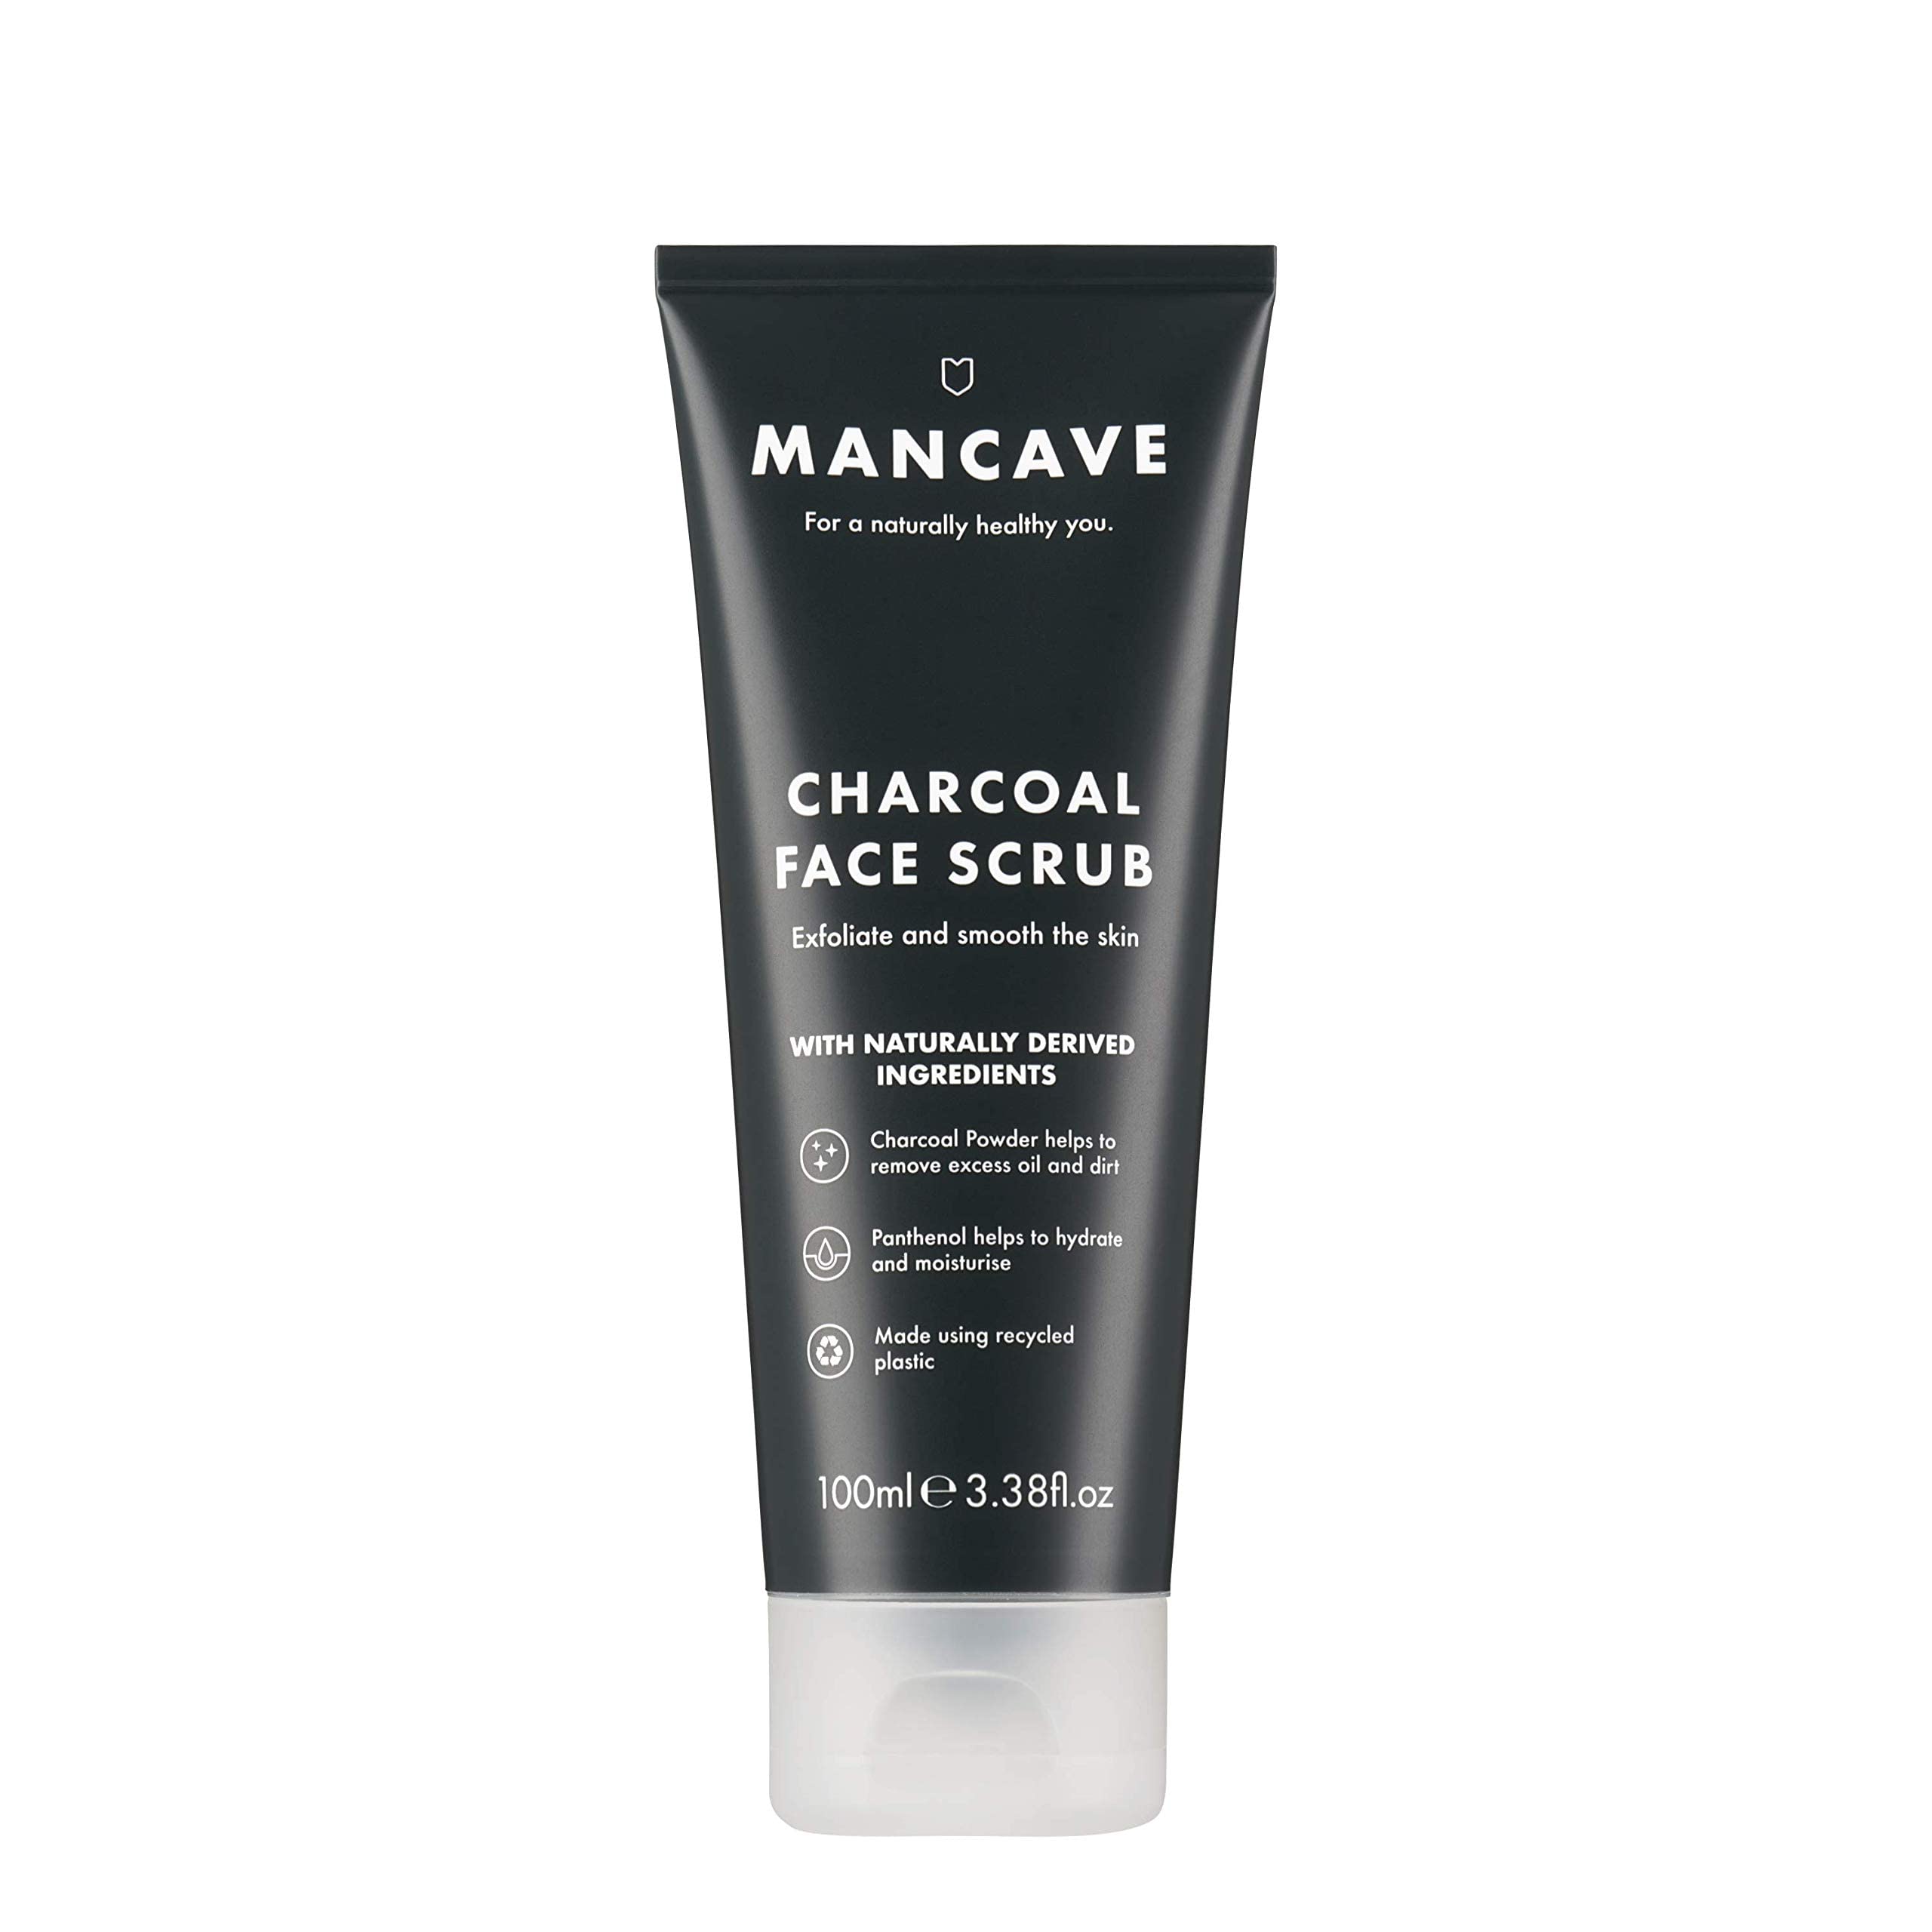 ManCave Charcoal Face Scrub 100ml for Men, Exfoliate & Smooth Oily Skin, Natural Formulation, Vegan Friendly, Tube made from Recycled Plastics